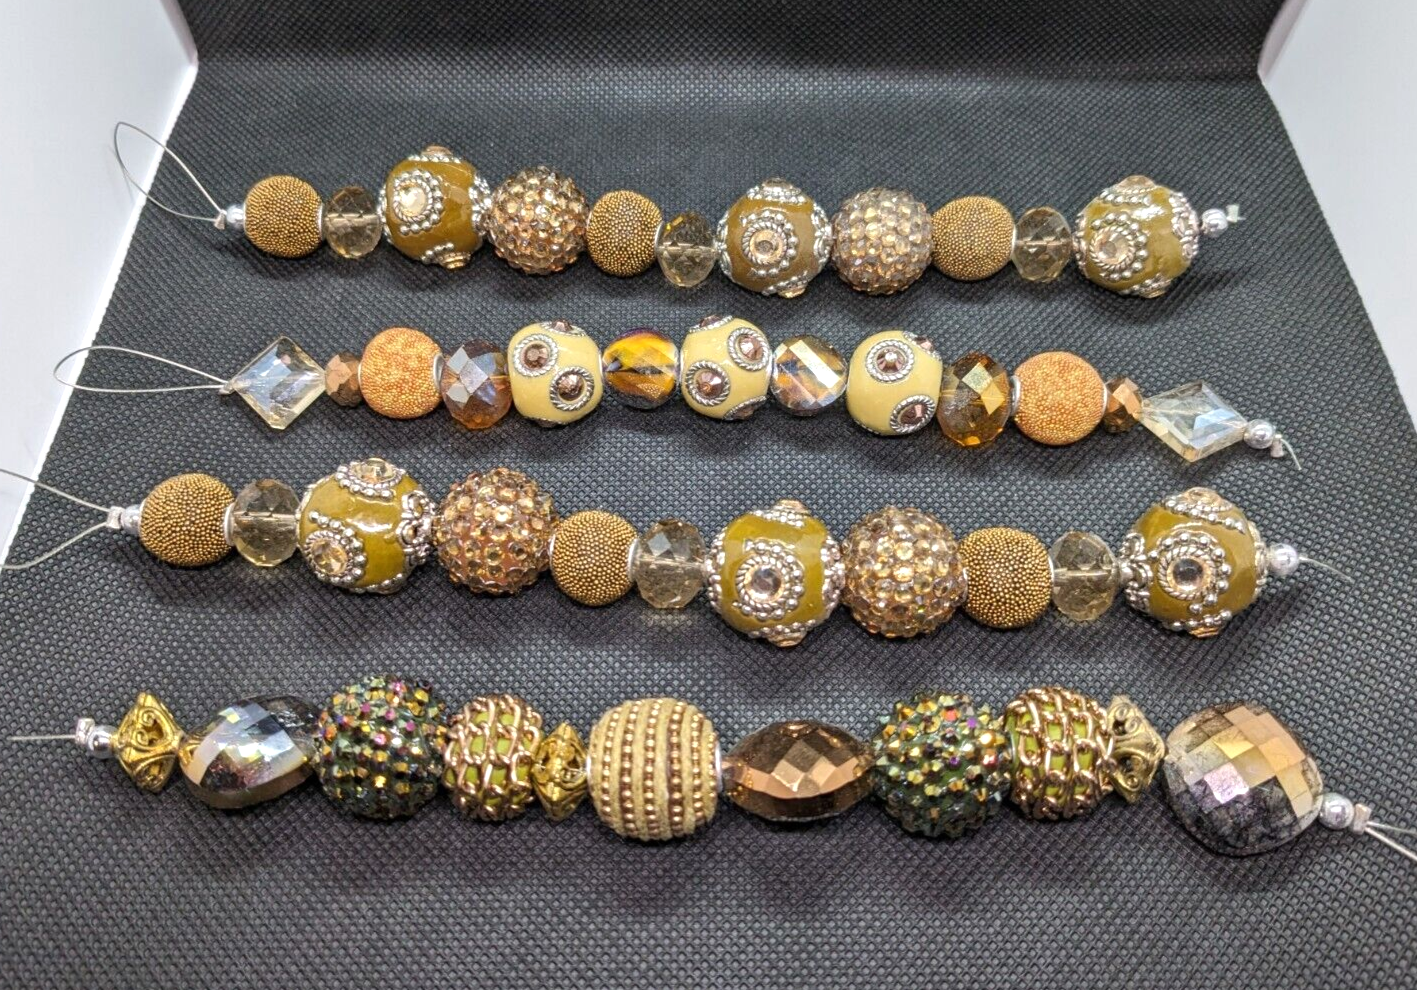 Primary image for Lot of Four Bead Strands Ornate Textured Multible Designs Focal Beads Jewelry